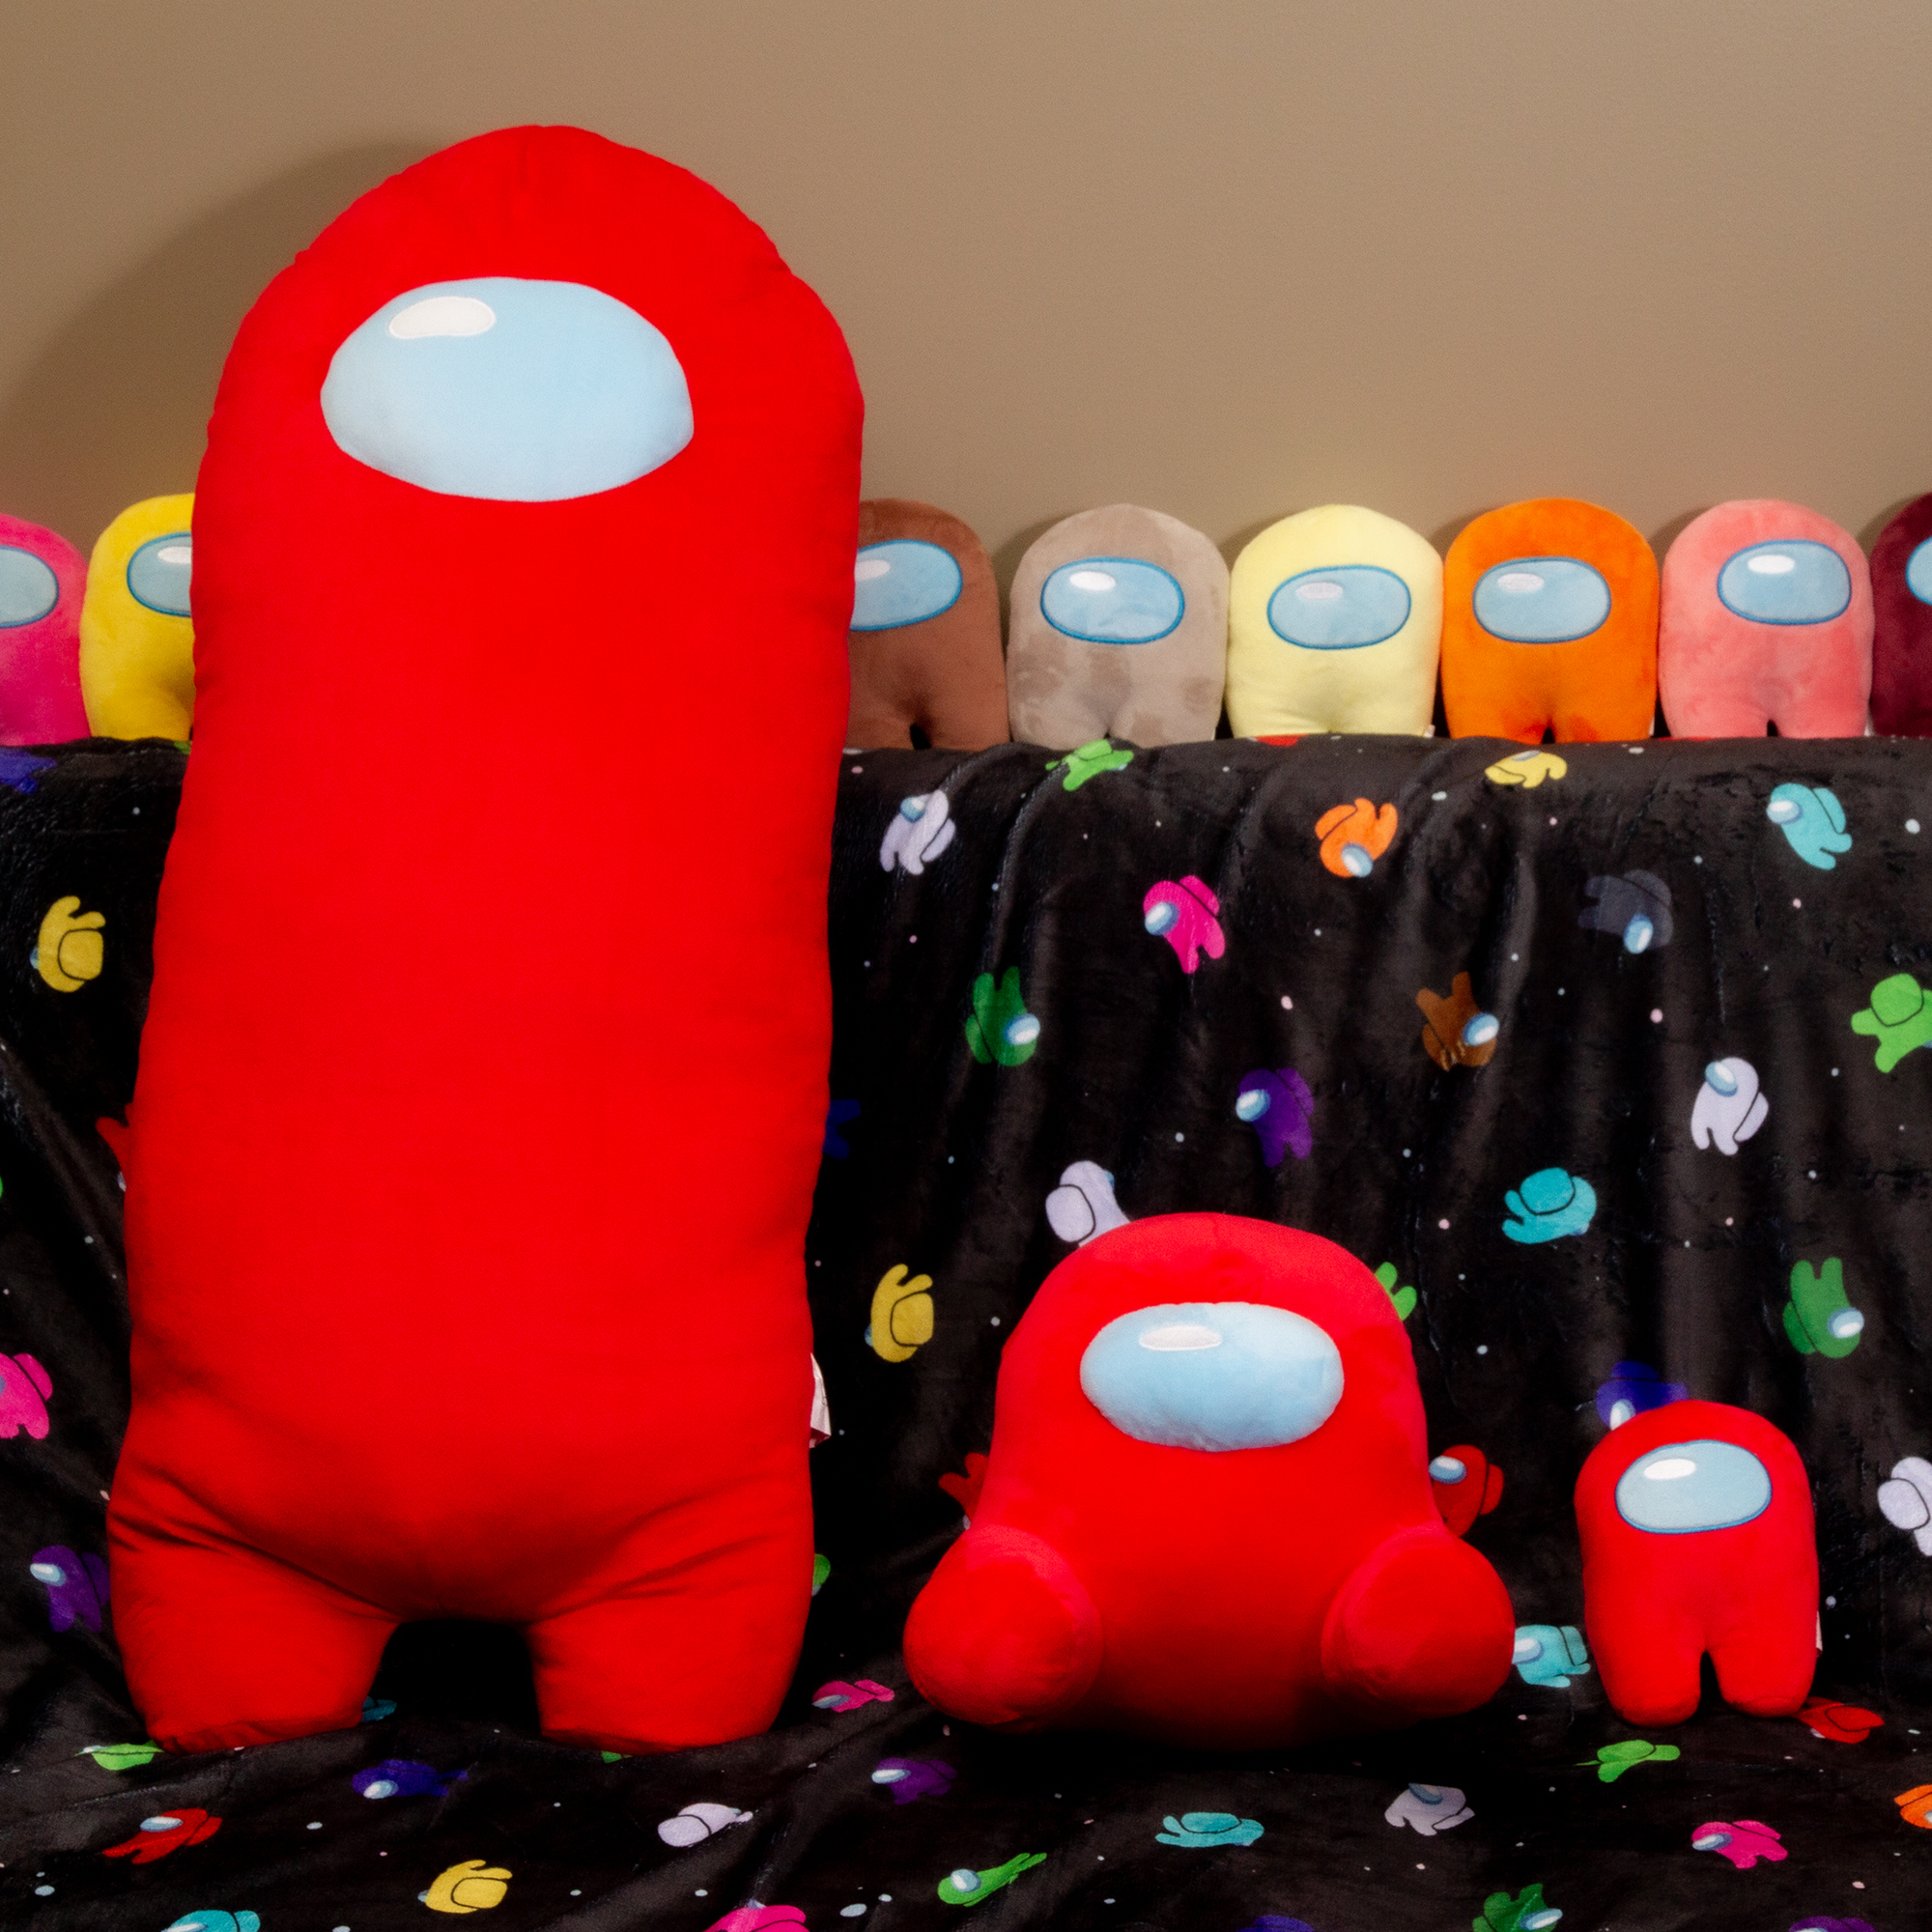 The front view of a very loooooong Red Crewmate plush with a rounded blue oval visor